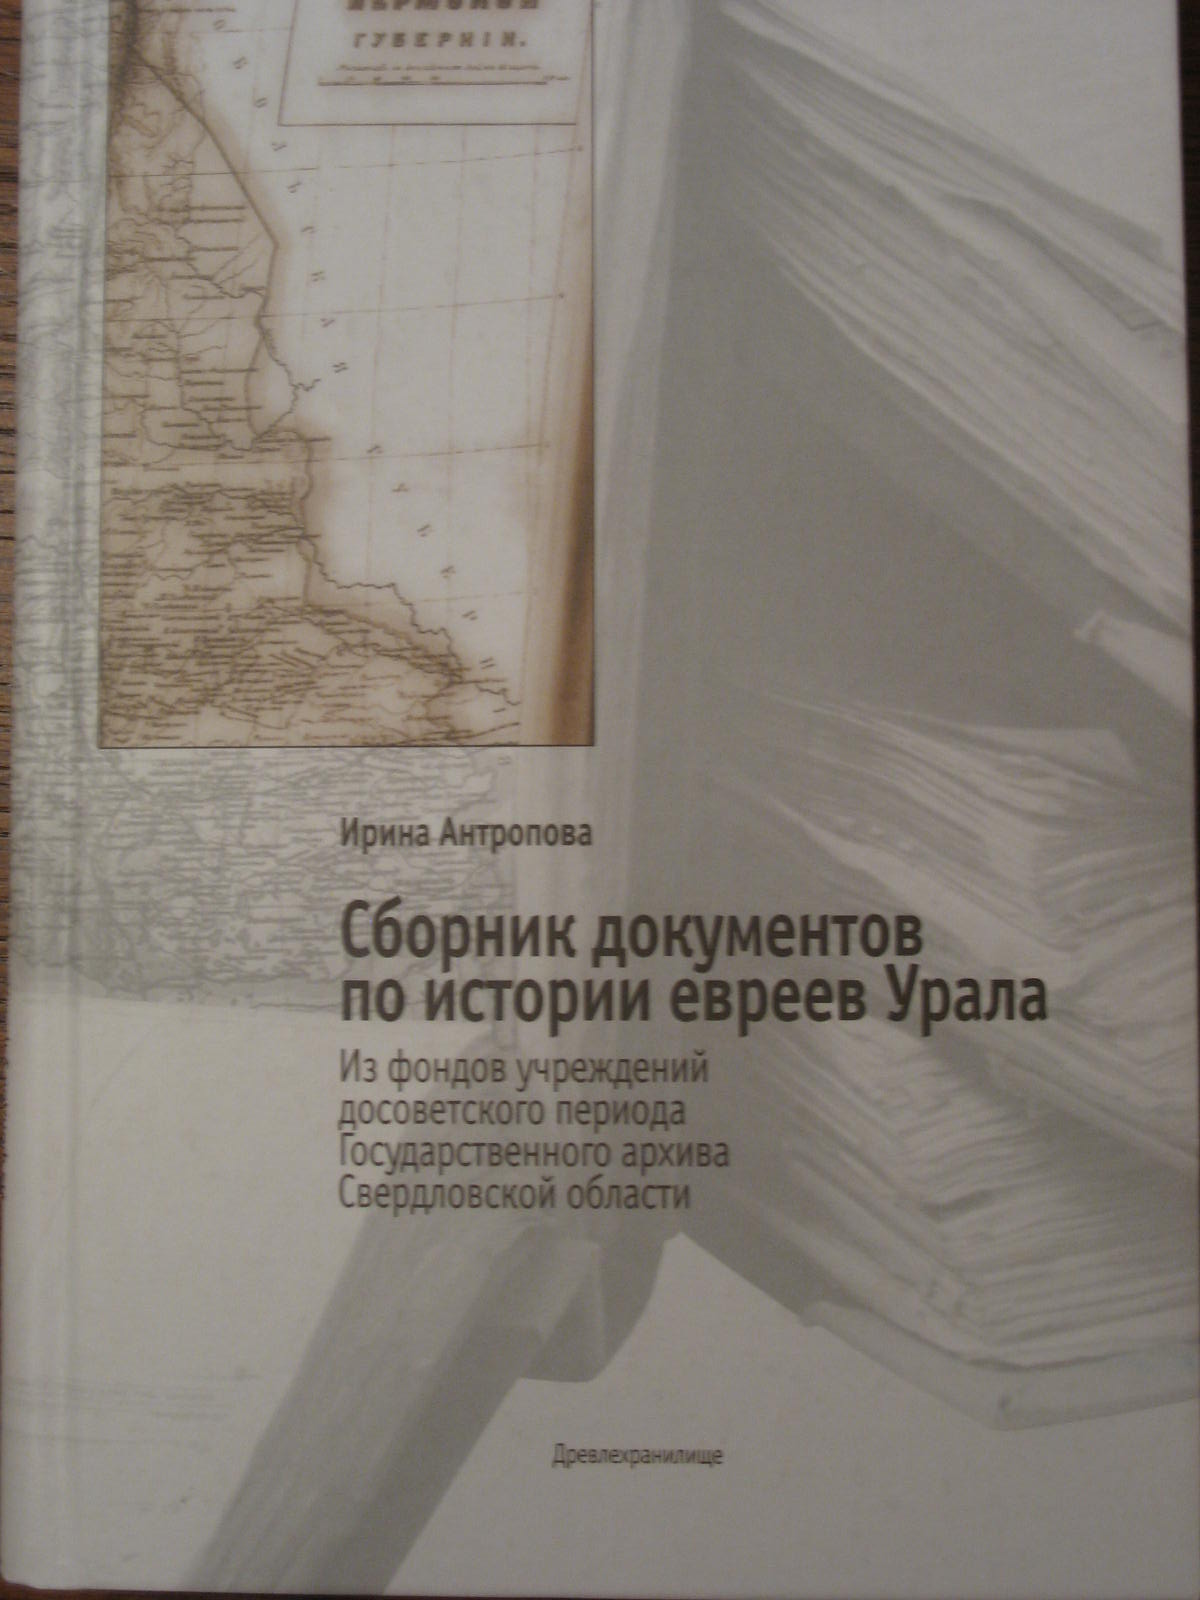 Documents on the Jews of the Urals